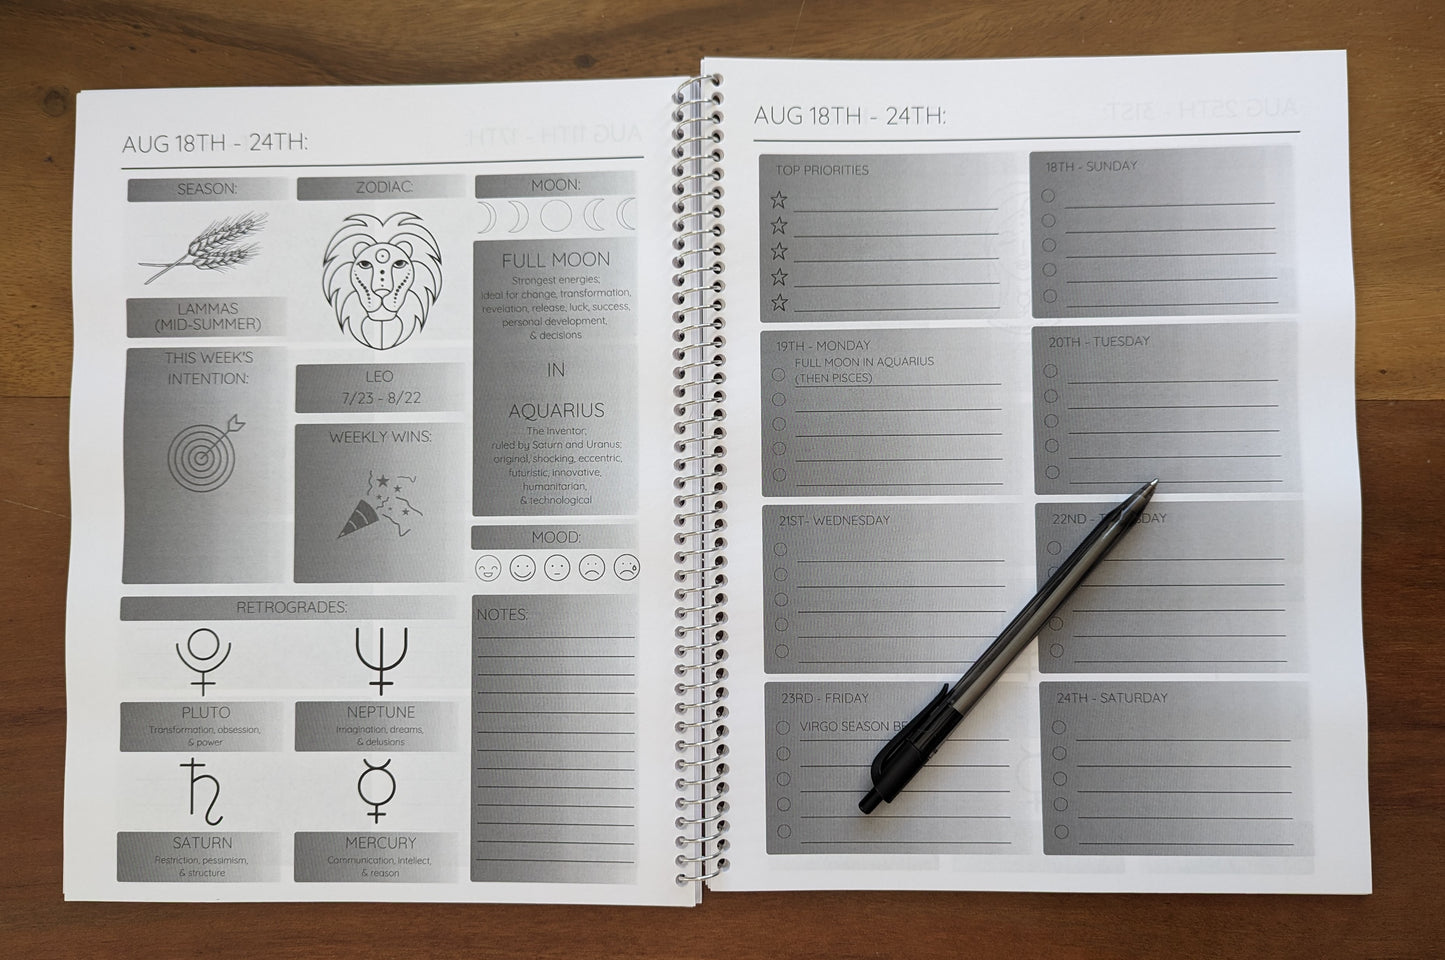 2024 Moon Phase Planner (Physical Version)